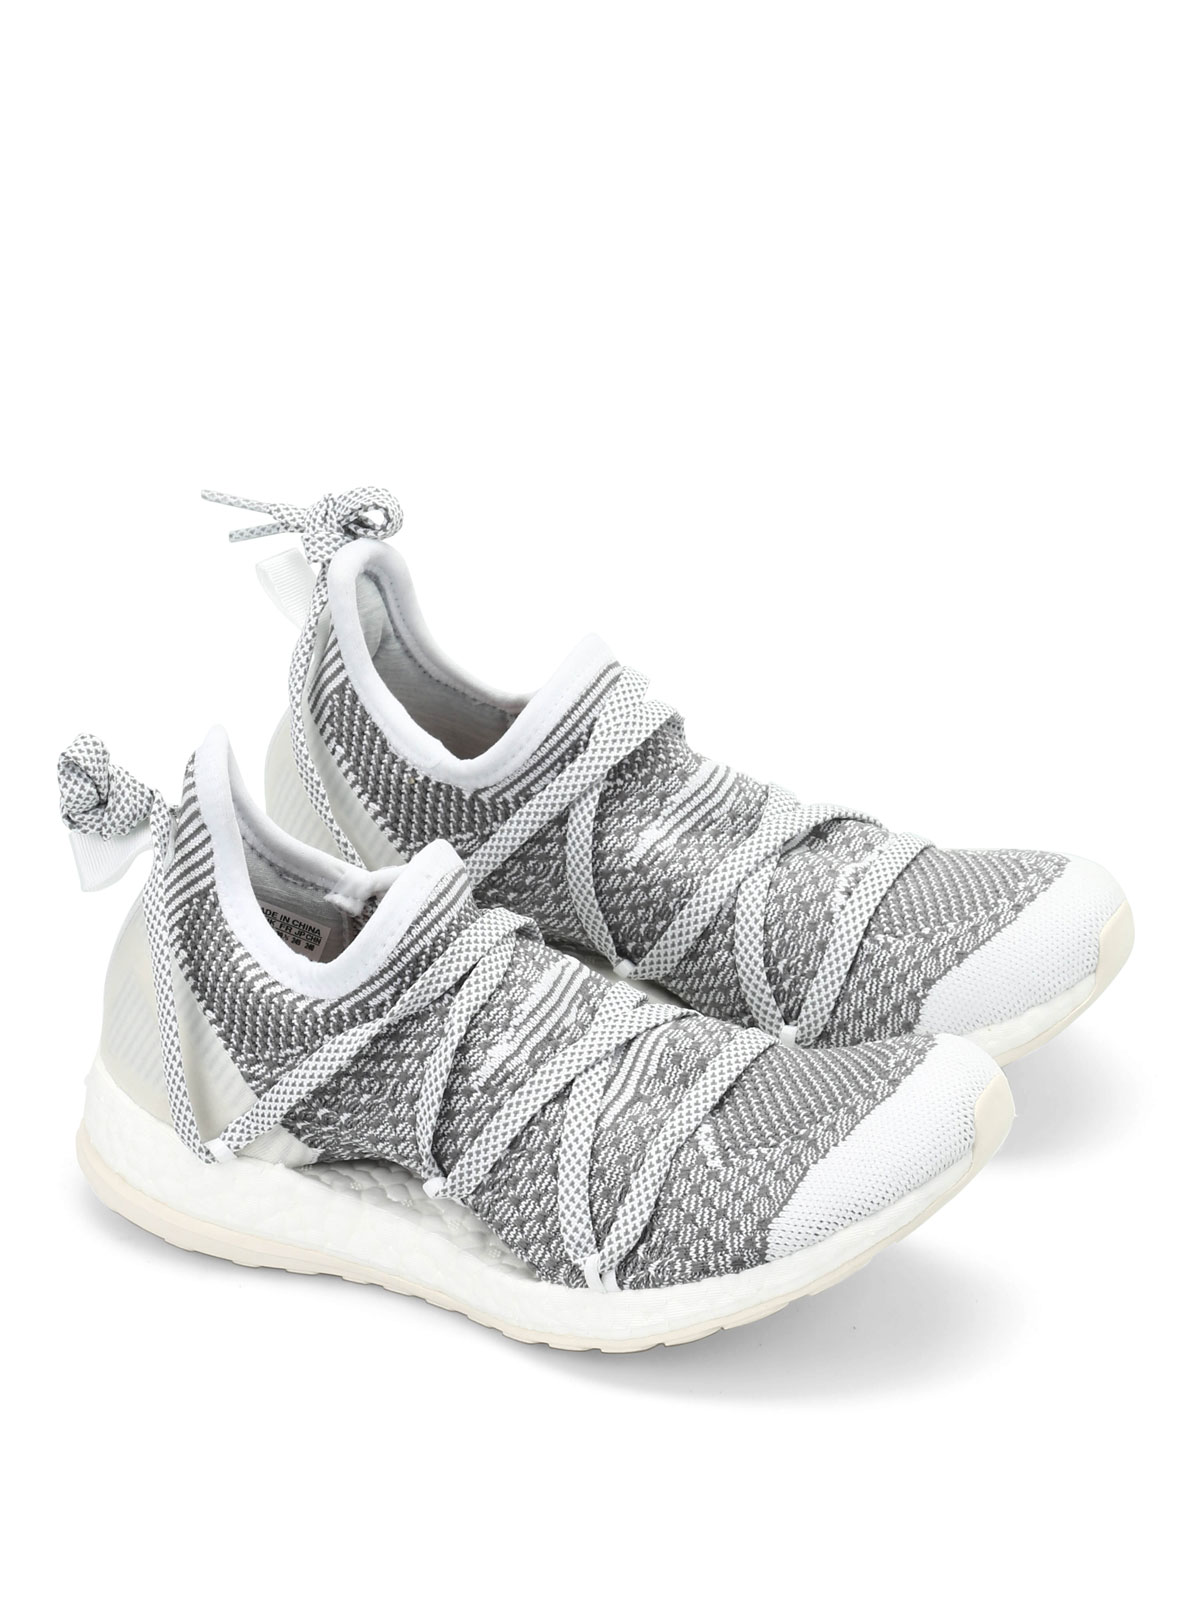 Trainers Adidas by McCartney - Pure Boost X sneakers - AF6431WHITEDKBLUEWHTVAP